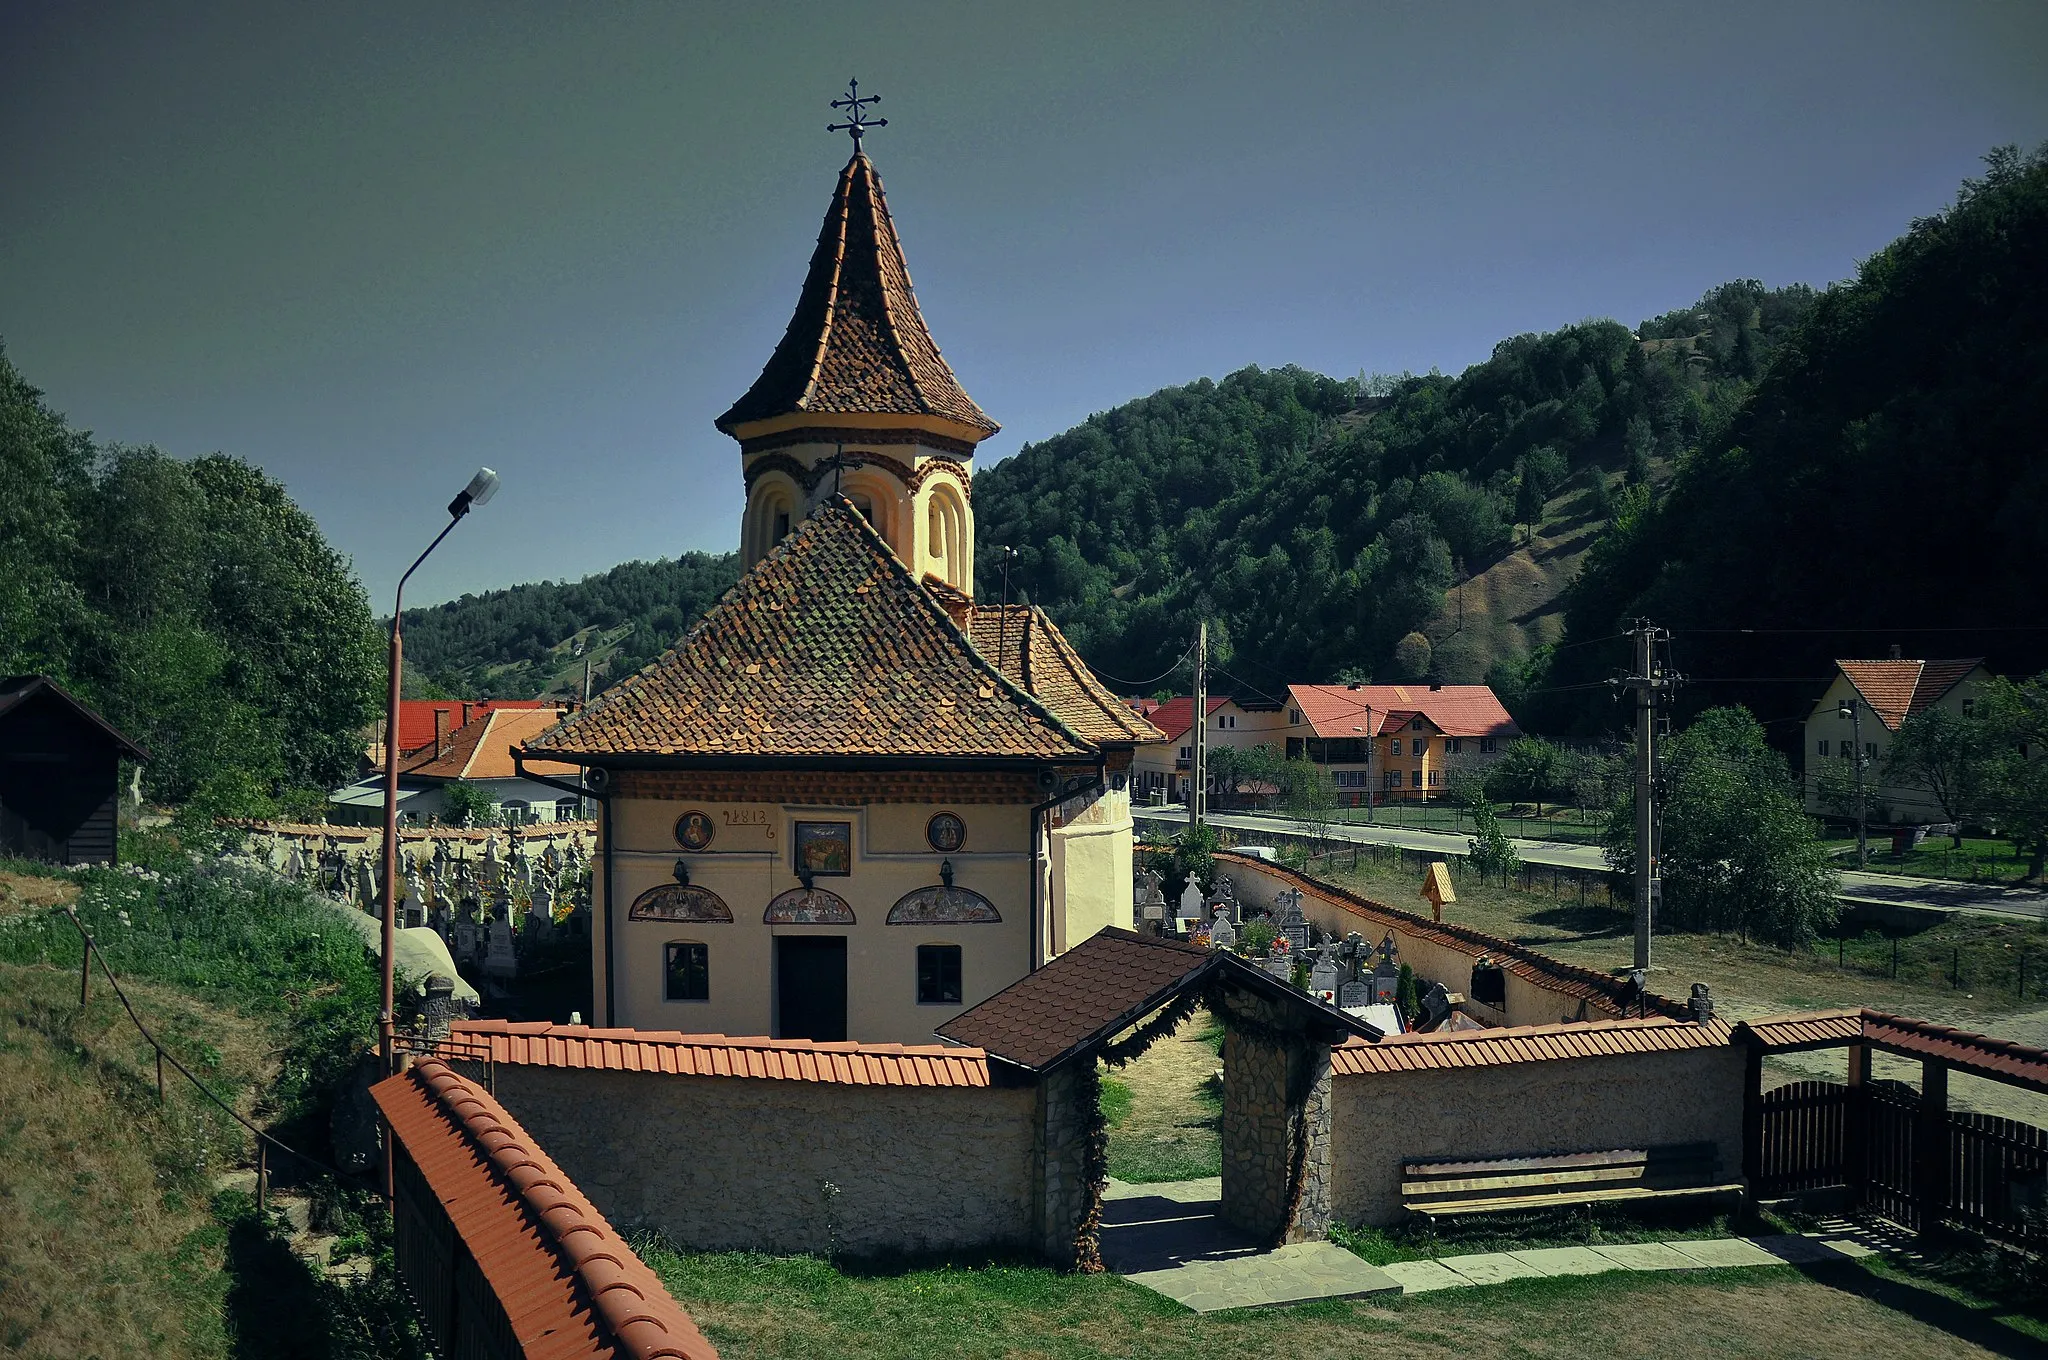 Photo showing: "Dormition of the Theotokos" Church from 1813 in Cheia village, Brasov district, Transylvania